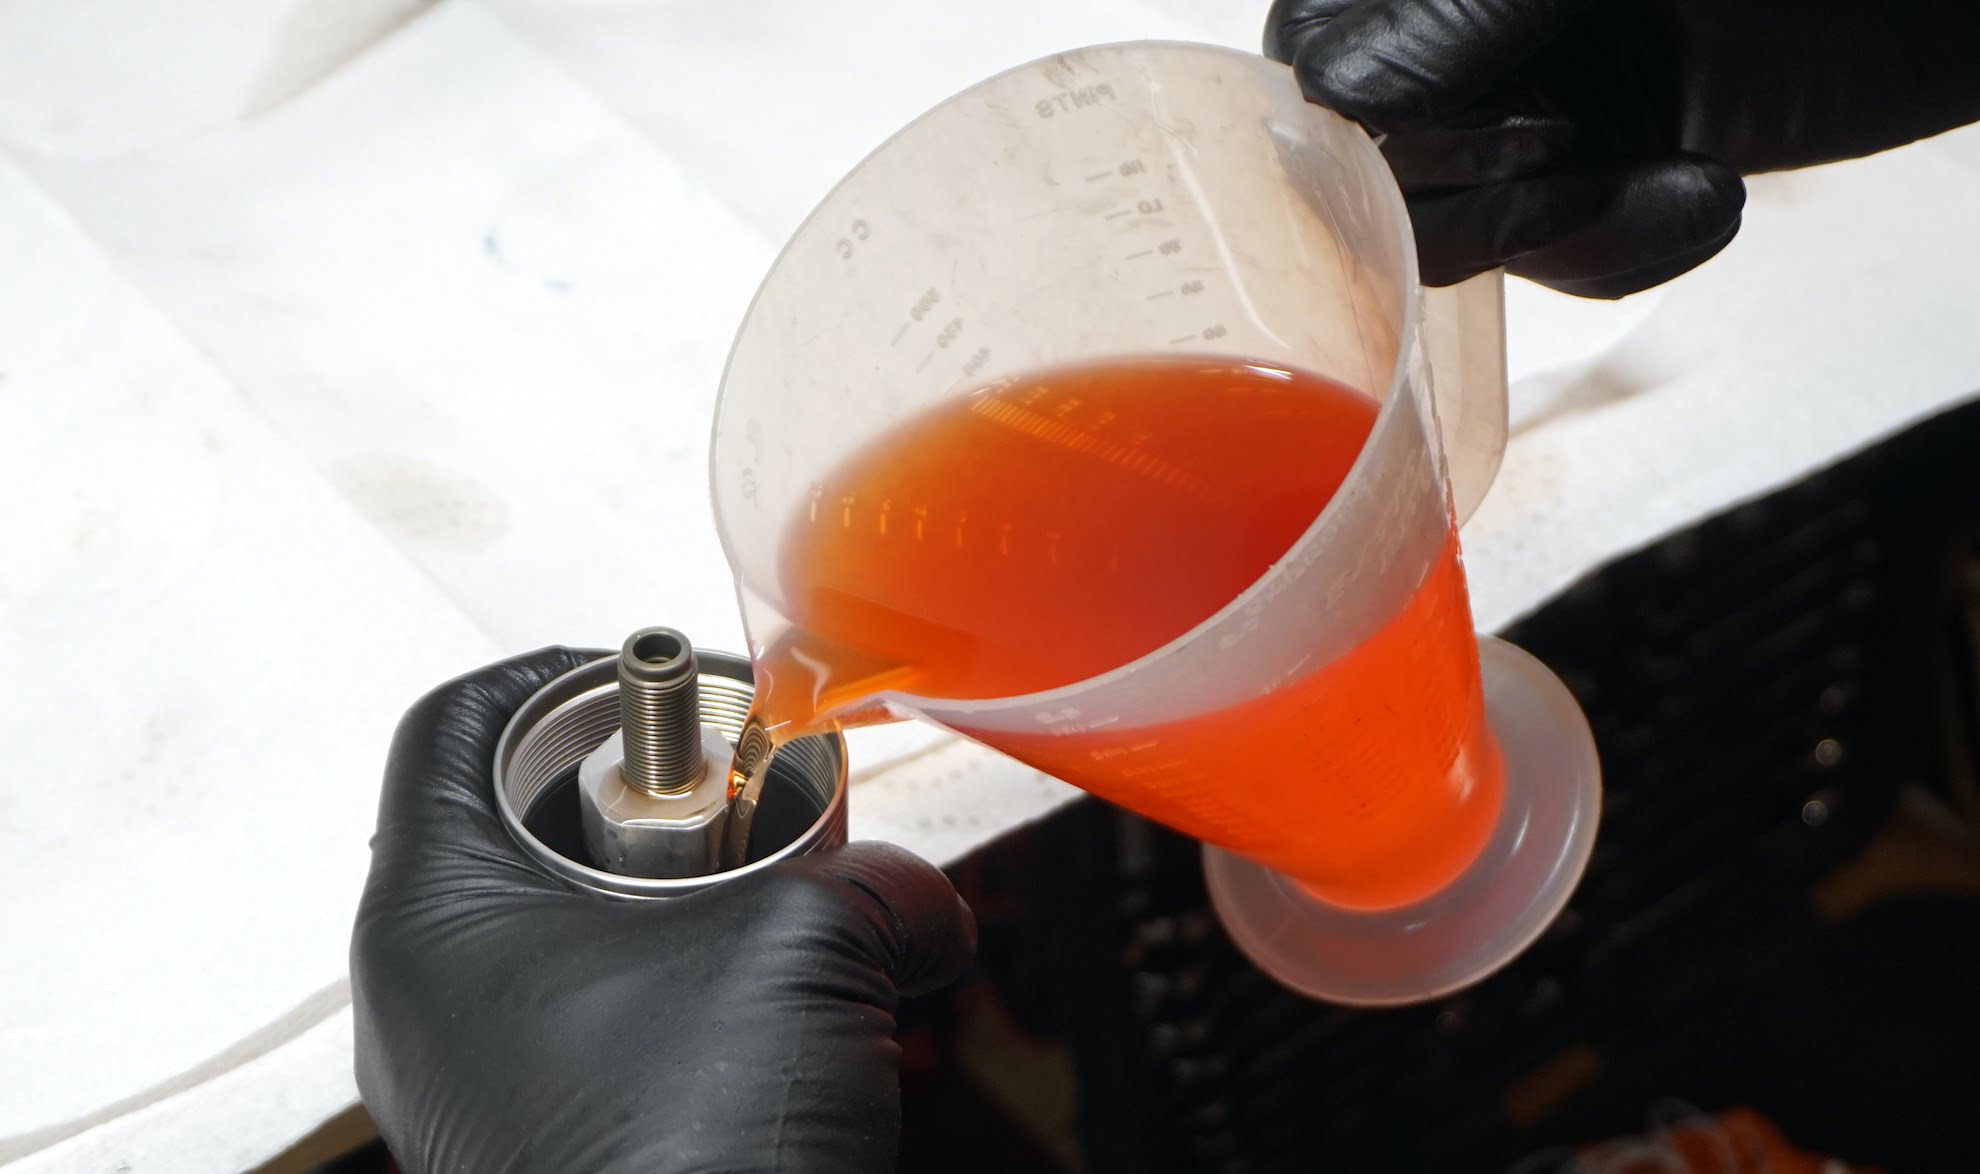 A hand holding a measuring cup filled with fresh fork oil and pouring it inside the front fork